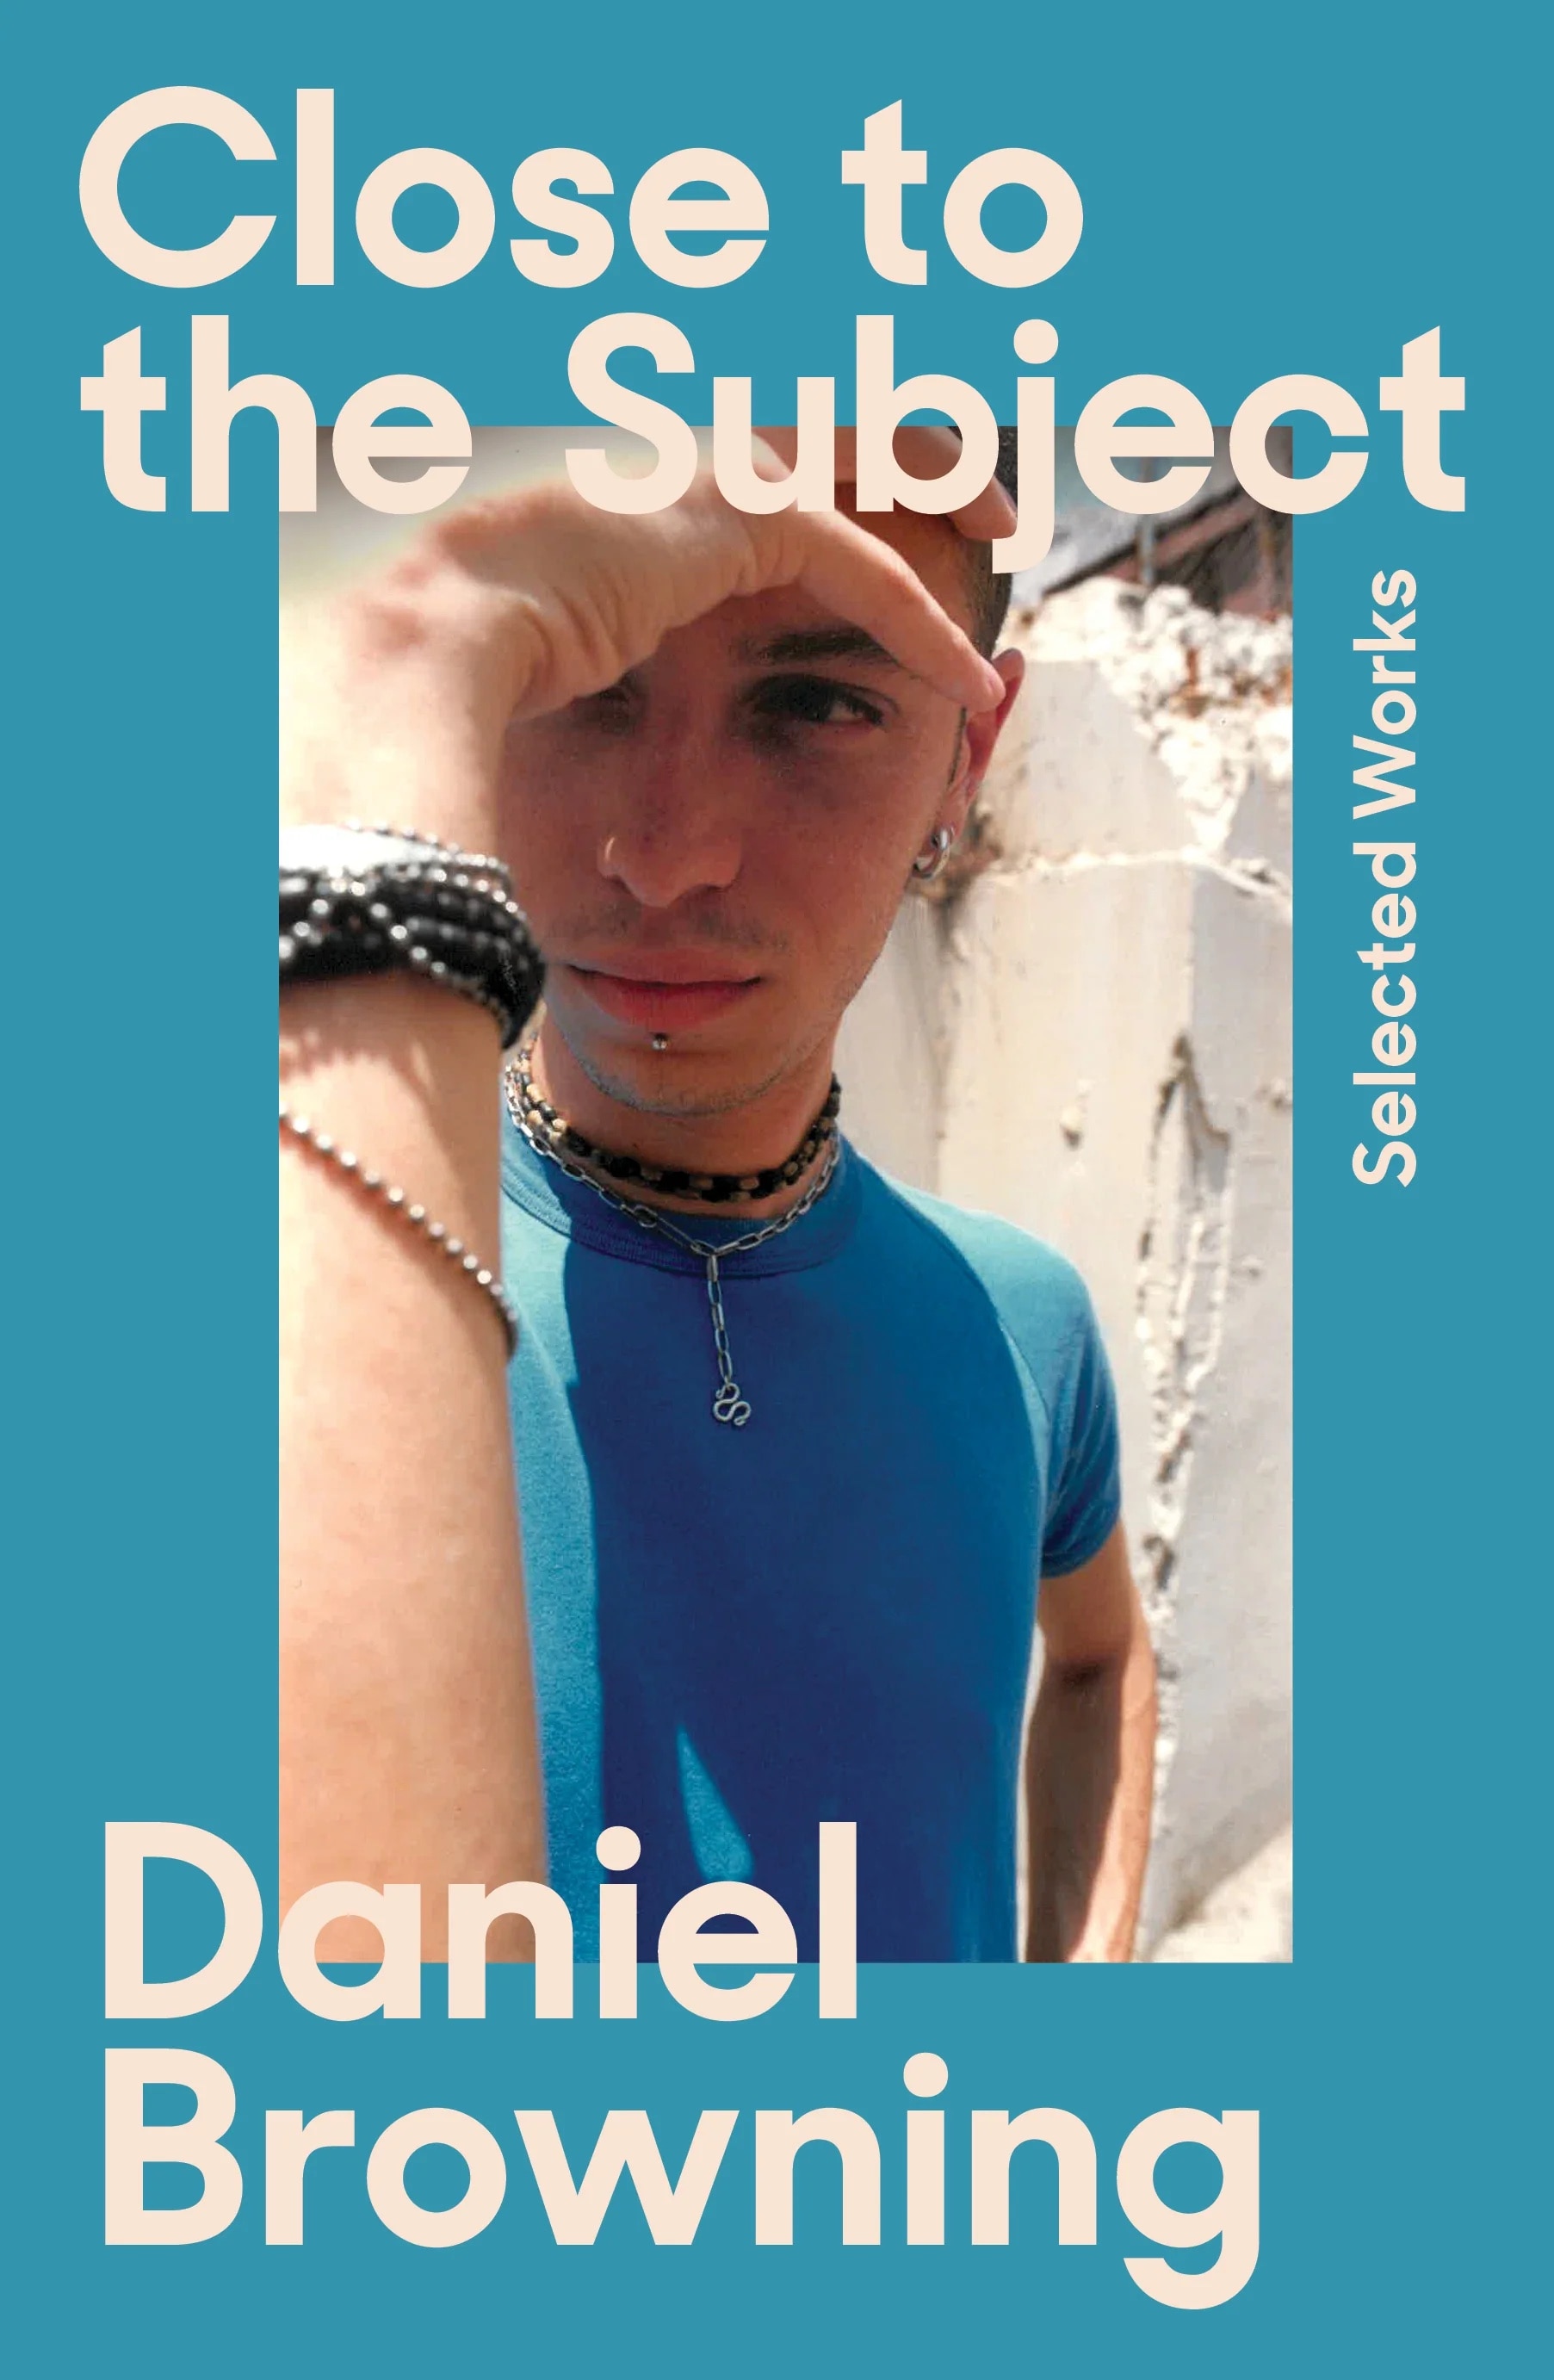 A book cover with a blue border showing a photograph of a young man wearing a blue t-shirt, with one hand shielding his eyes